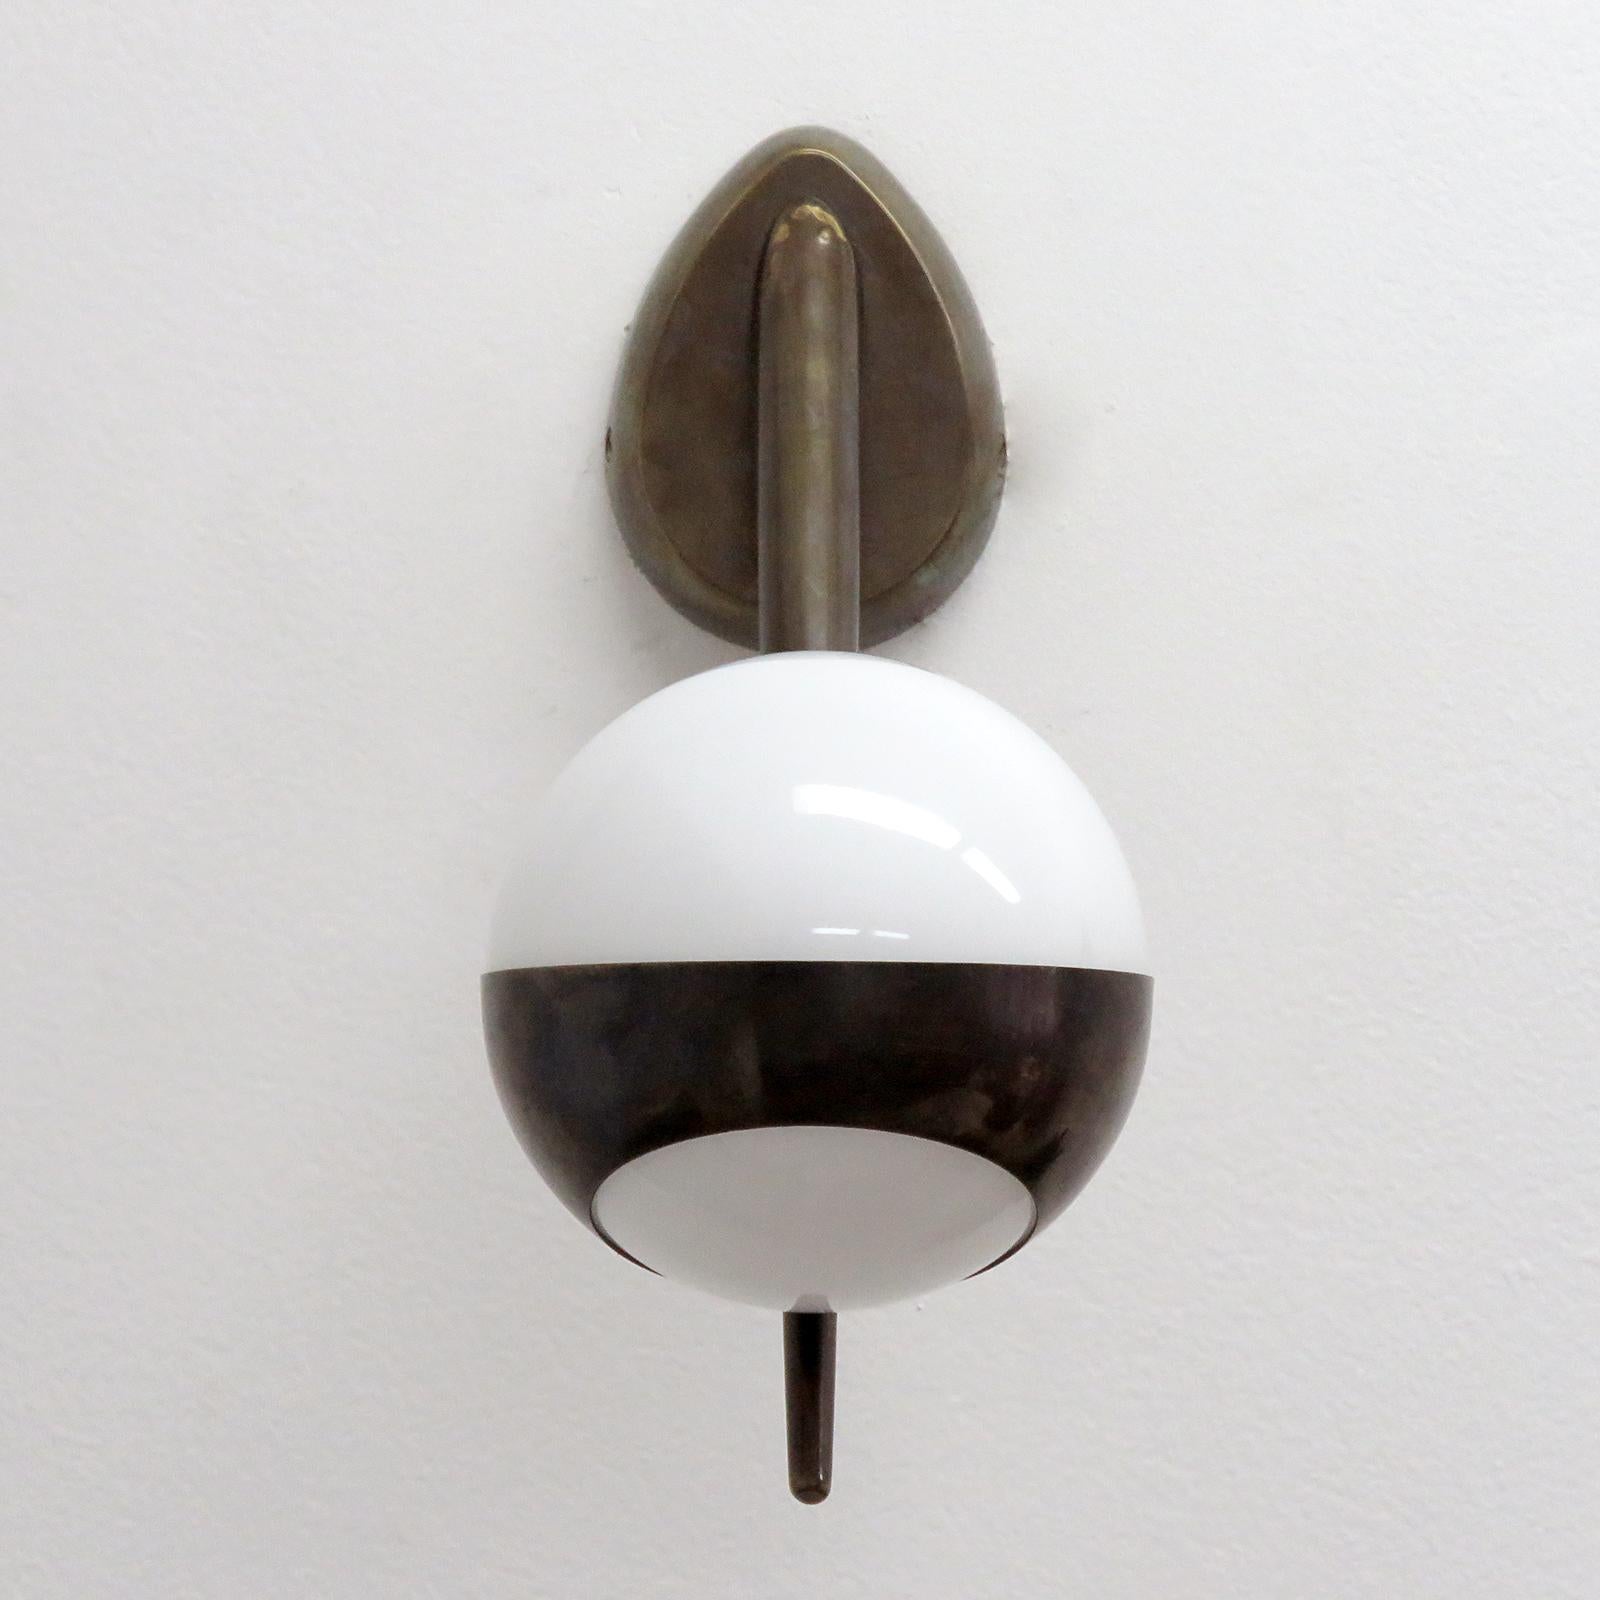 Wonderful Italian patinated brass sconces, with a white cased glass globe on a cantilevered arm, one G9 socket, max. wattage 75w each or LED equivalent, wired for US standards or European standards (110v/220v), UL listing available upon request for